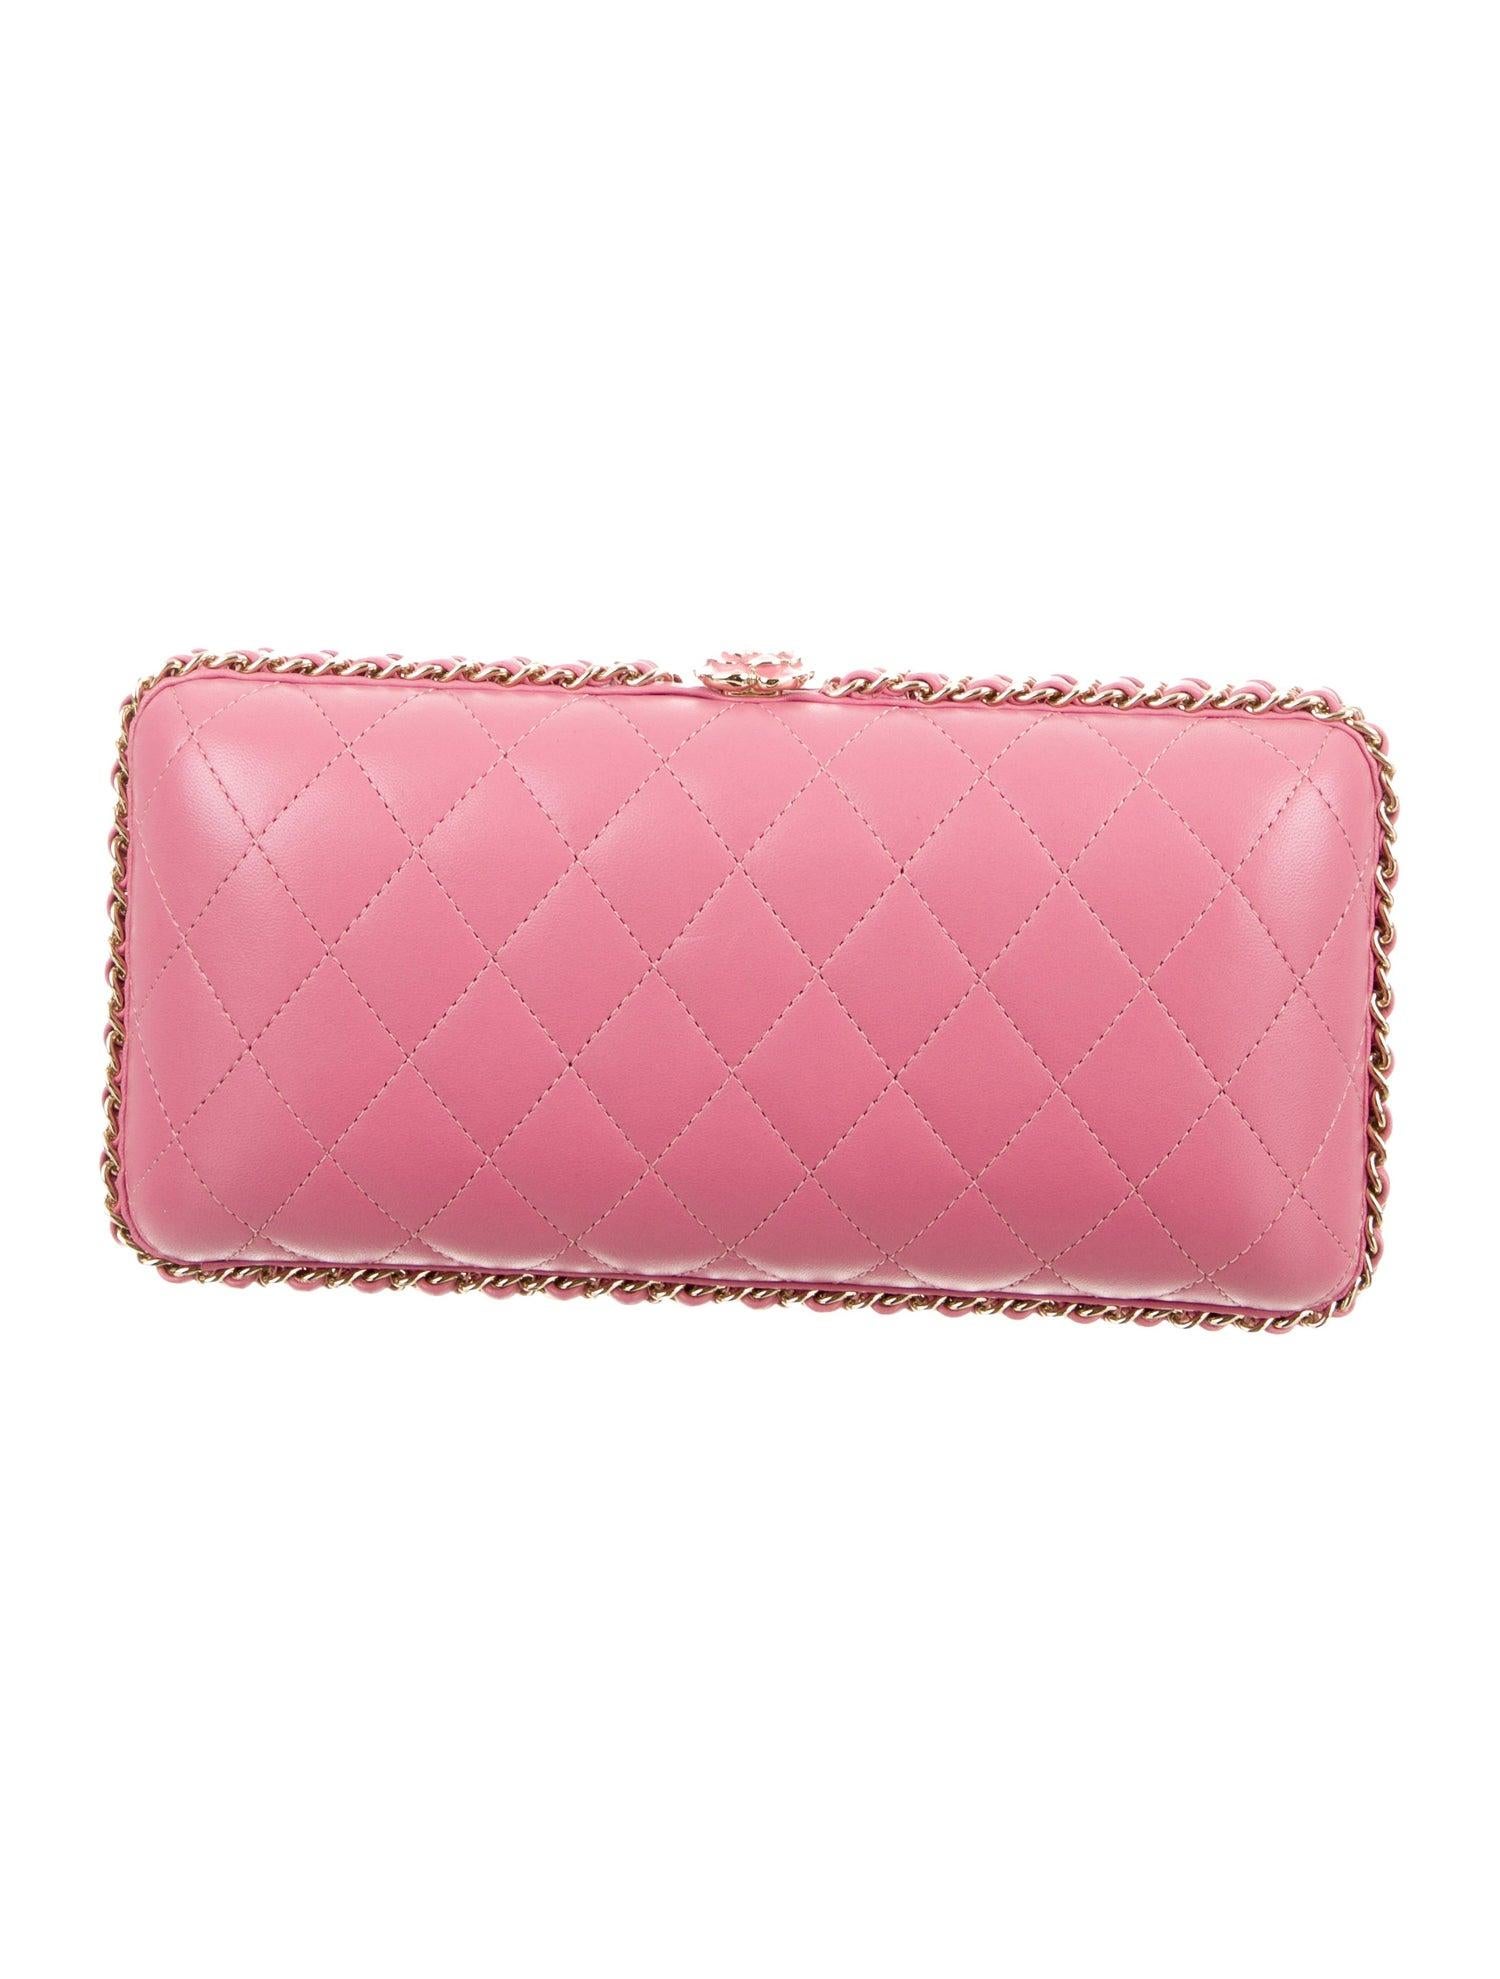 Women's Chanel NEW Light Pink Leather Gold 2 in 1 Chain Evening Shoulder Clutch Bag